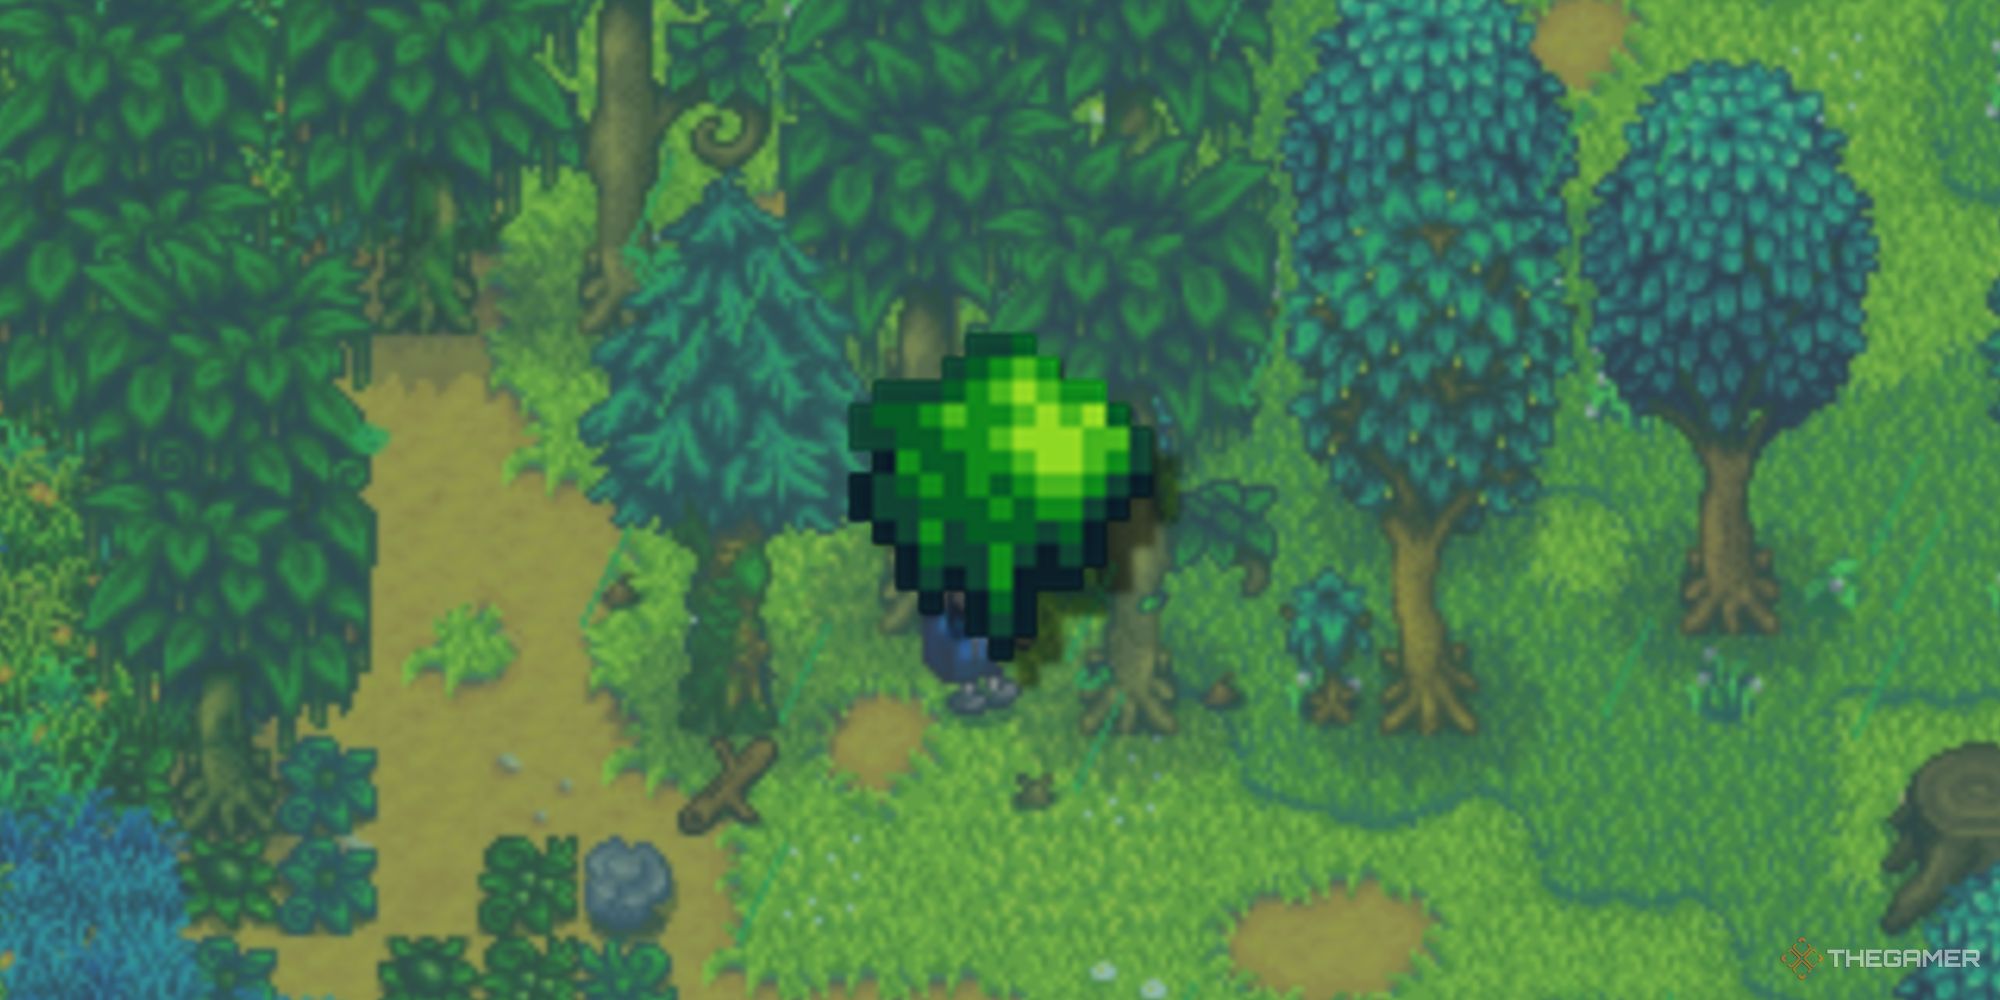 stardew valley featured image highlighting moss png